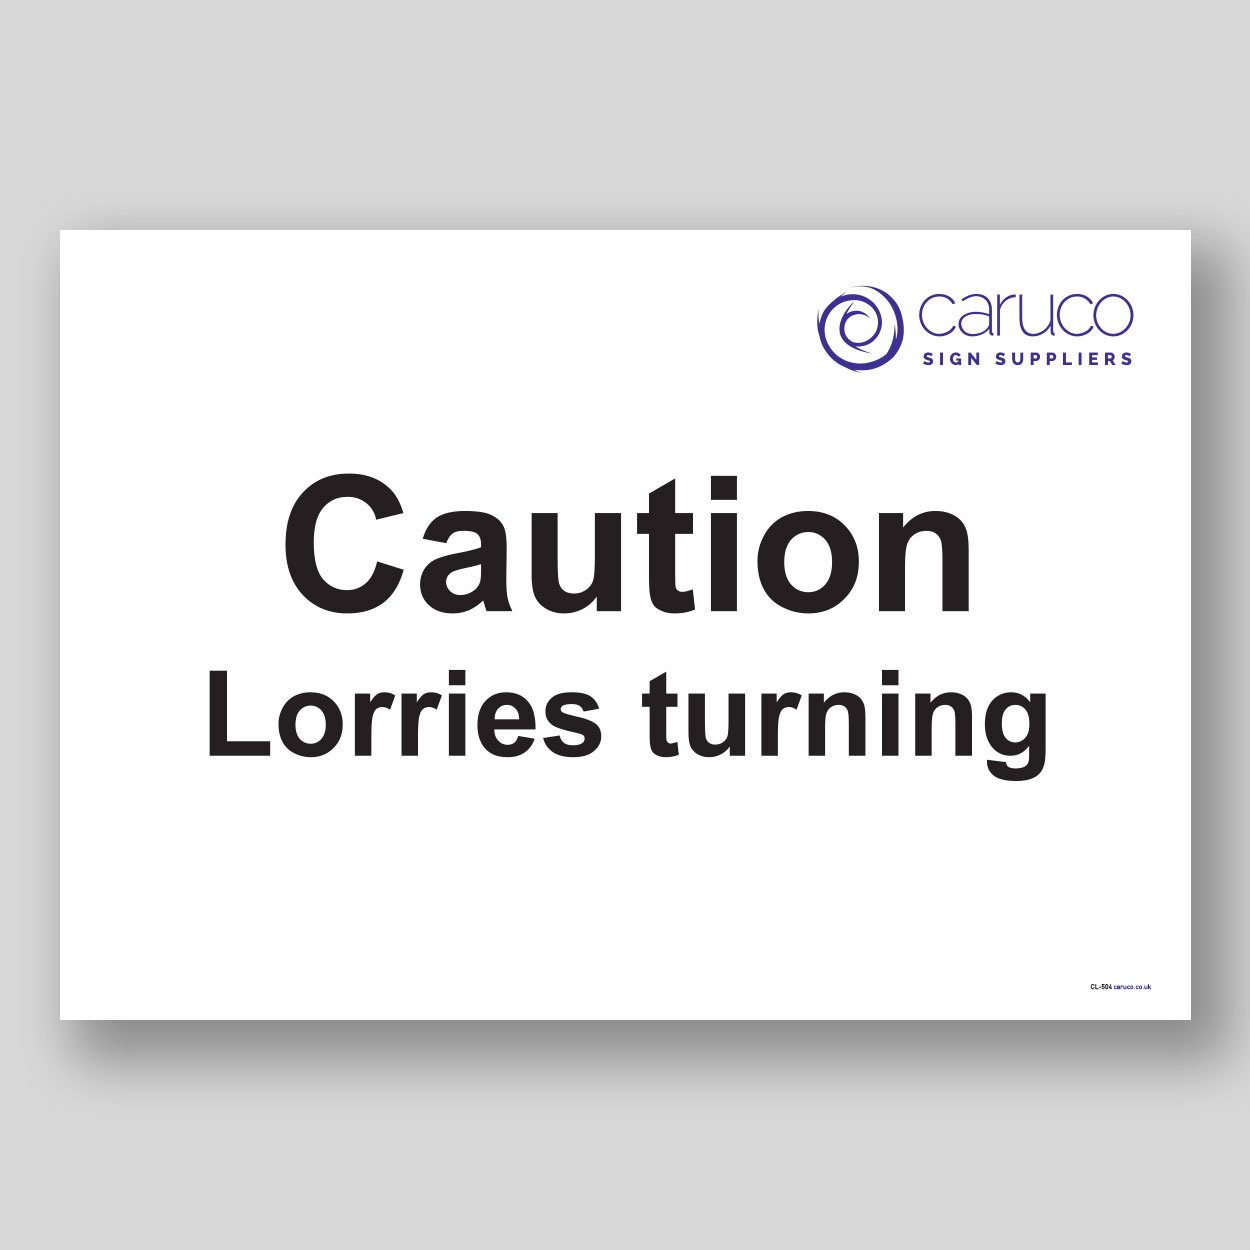 CL-504 Caution - lorries turning